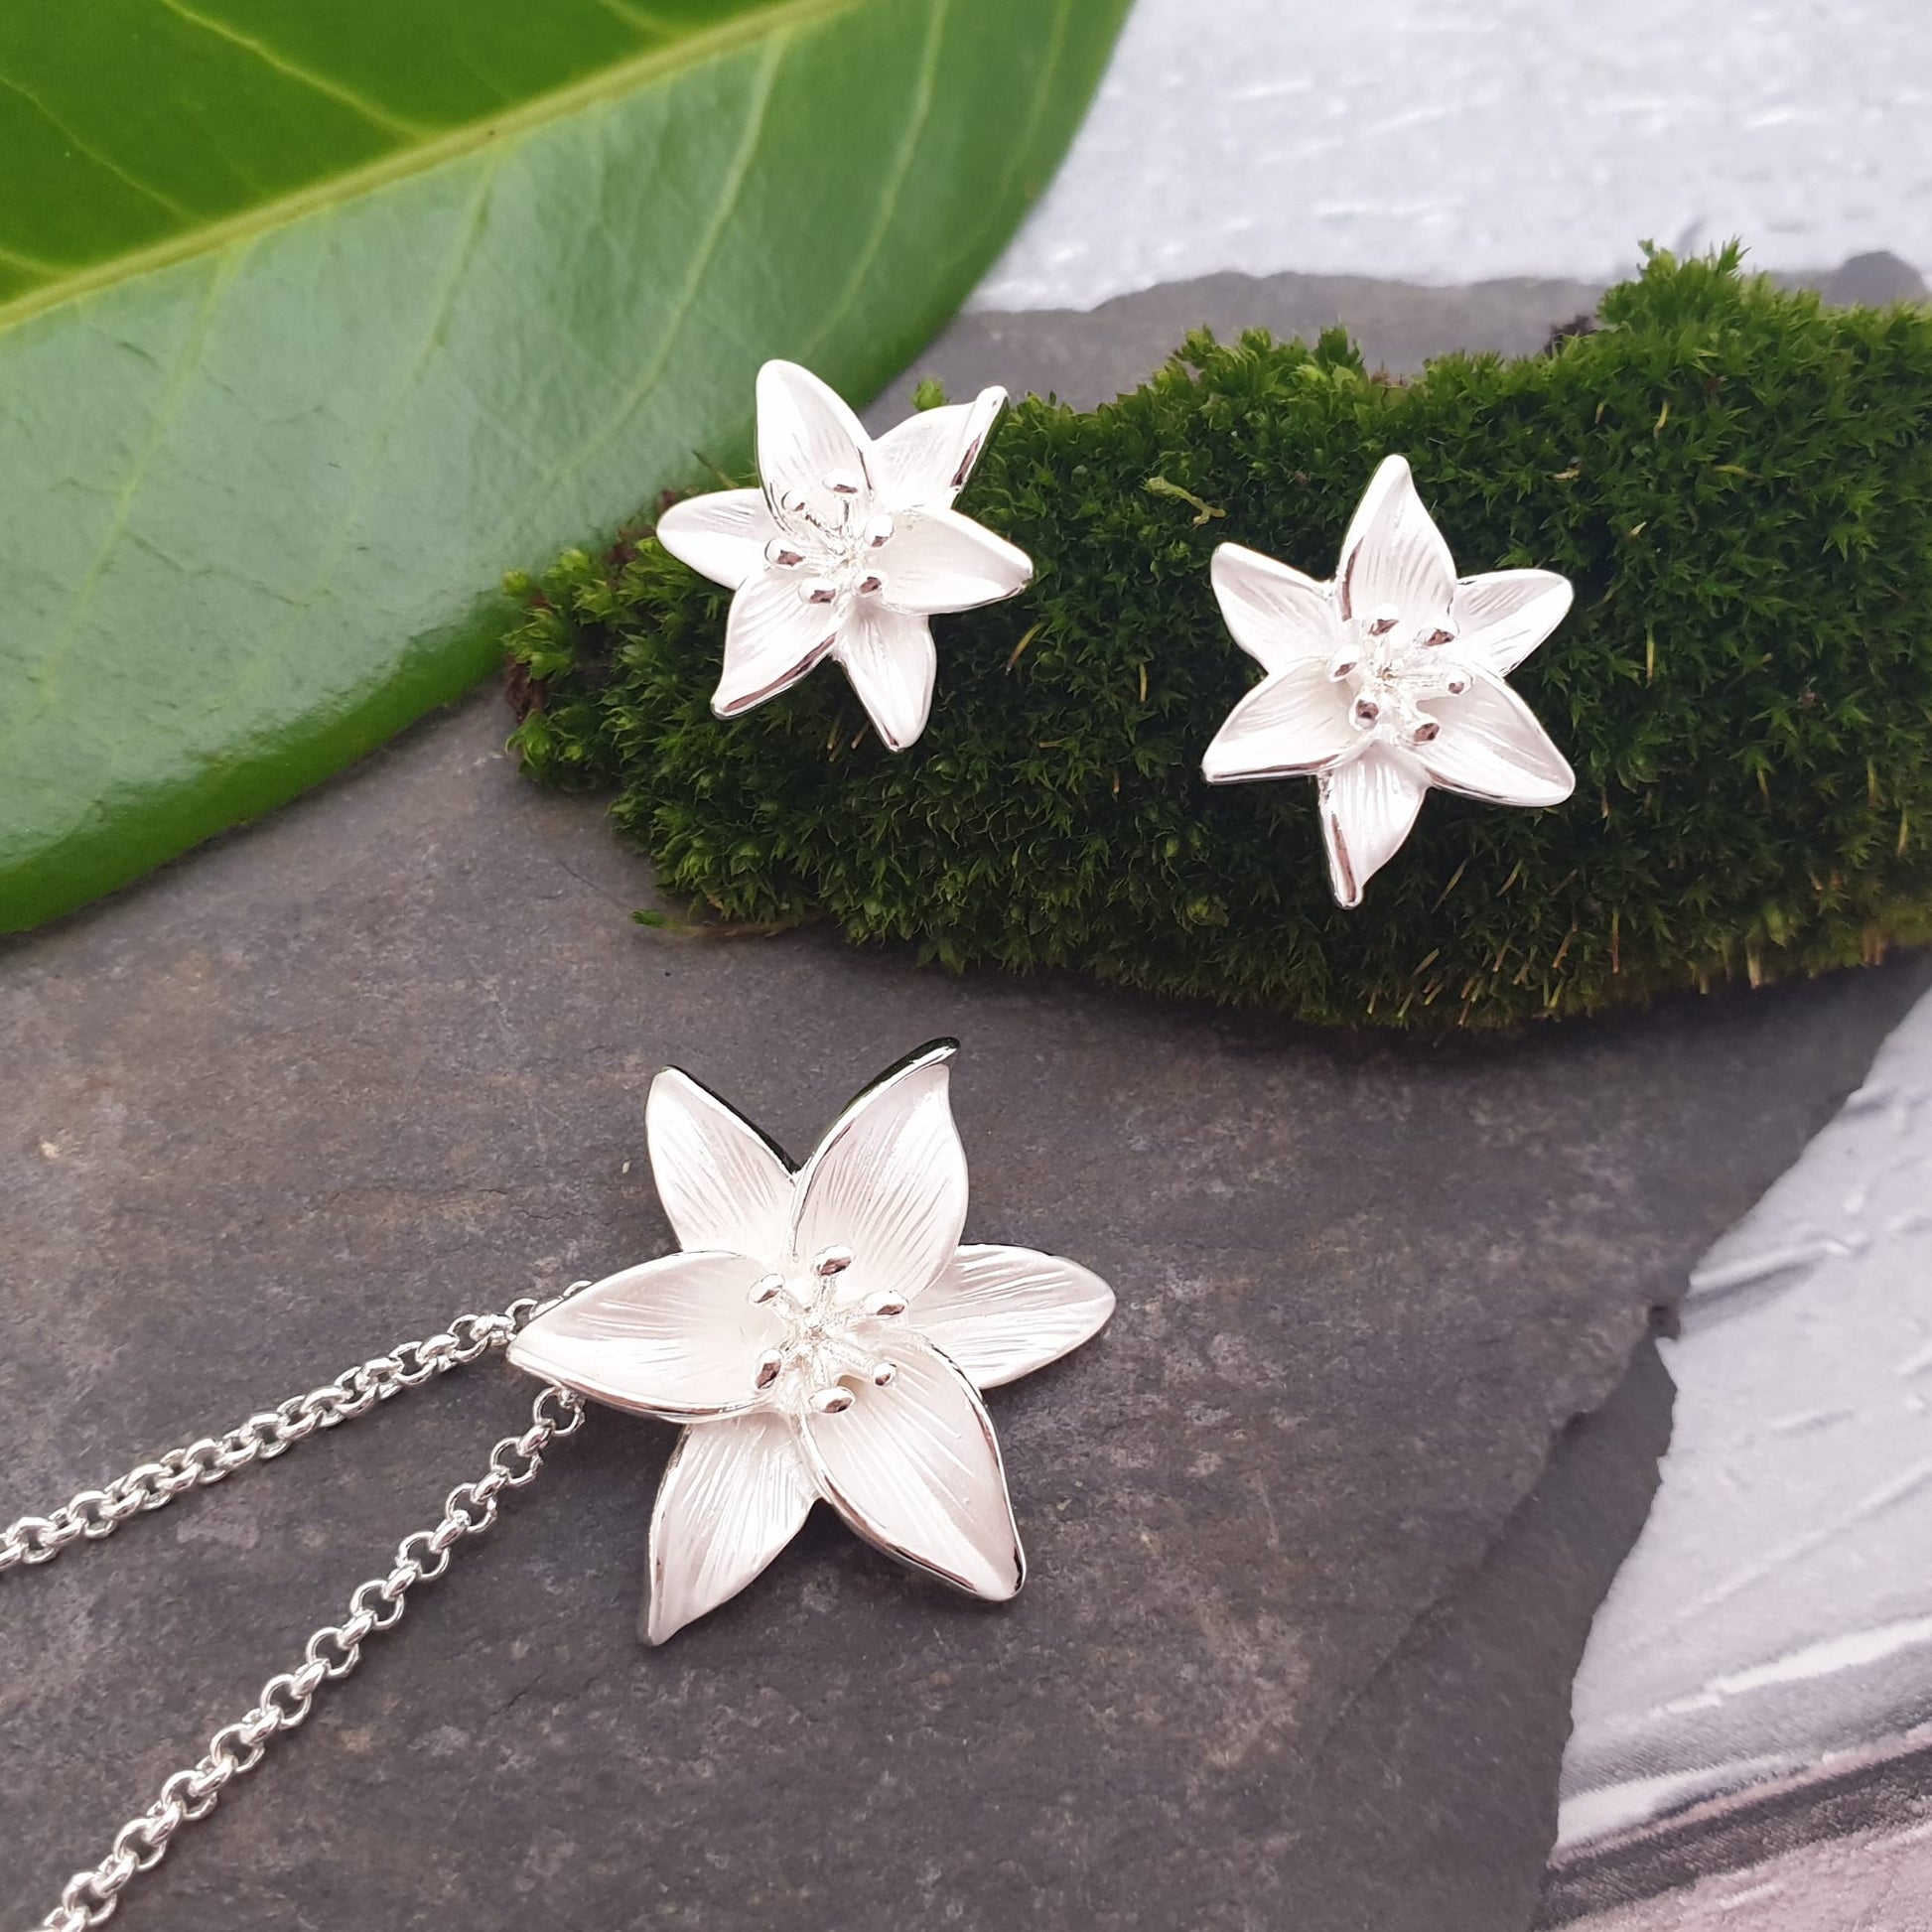 2 piece jewellery set featuring white lillies. Earrings and matching necklace